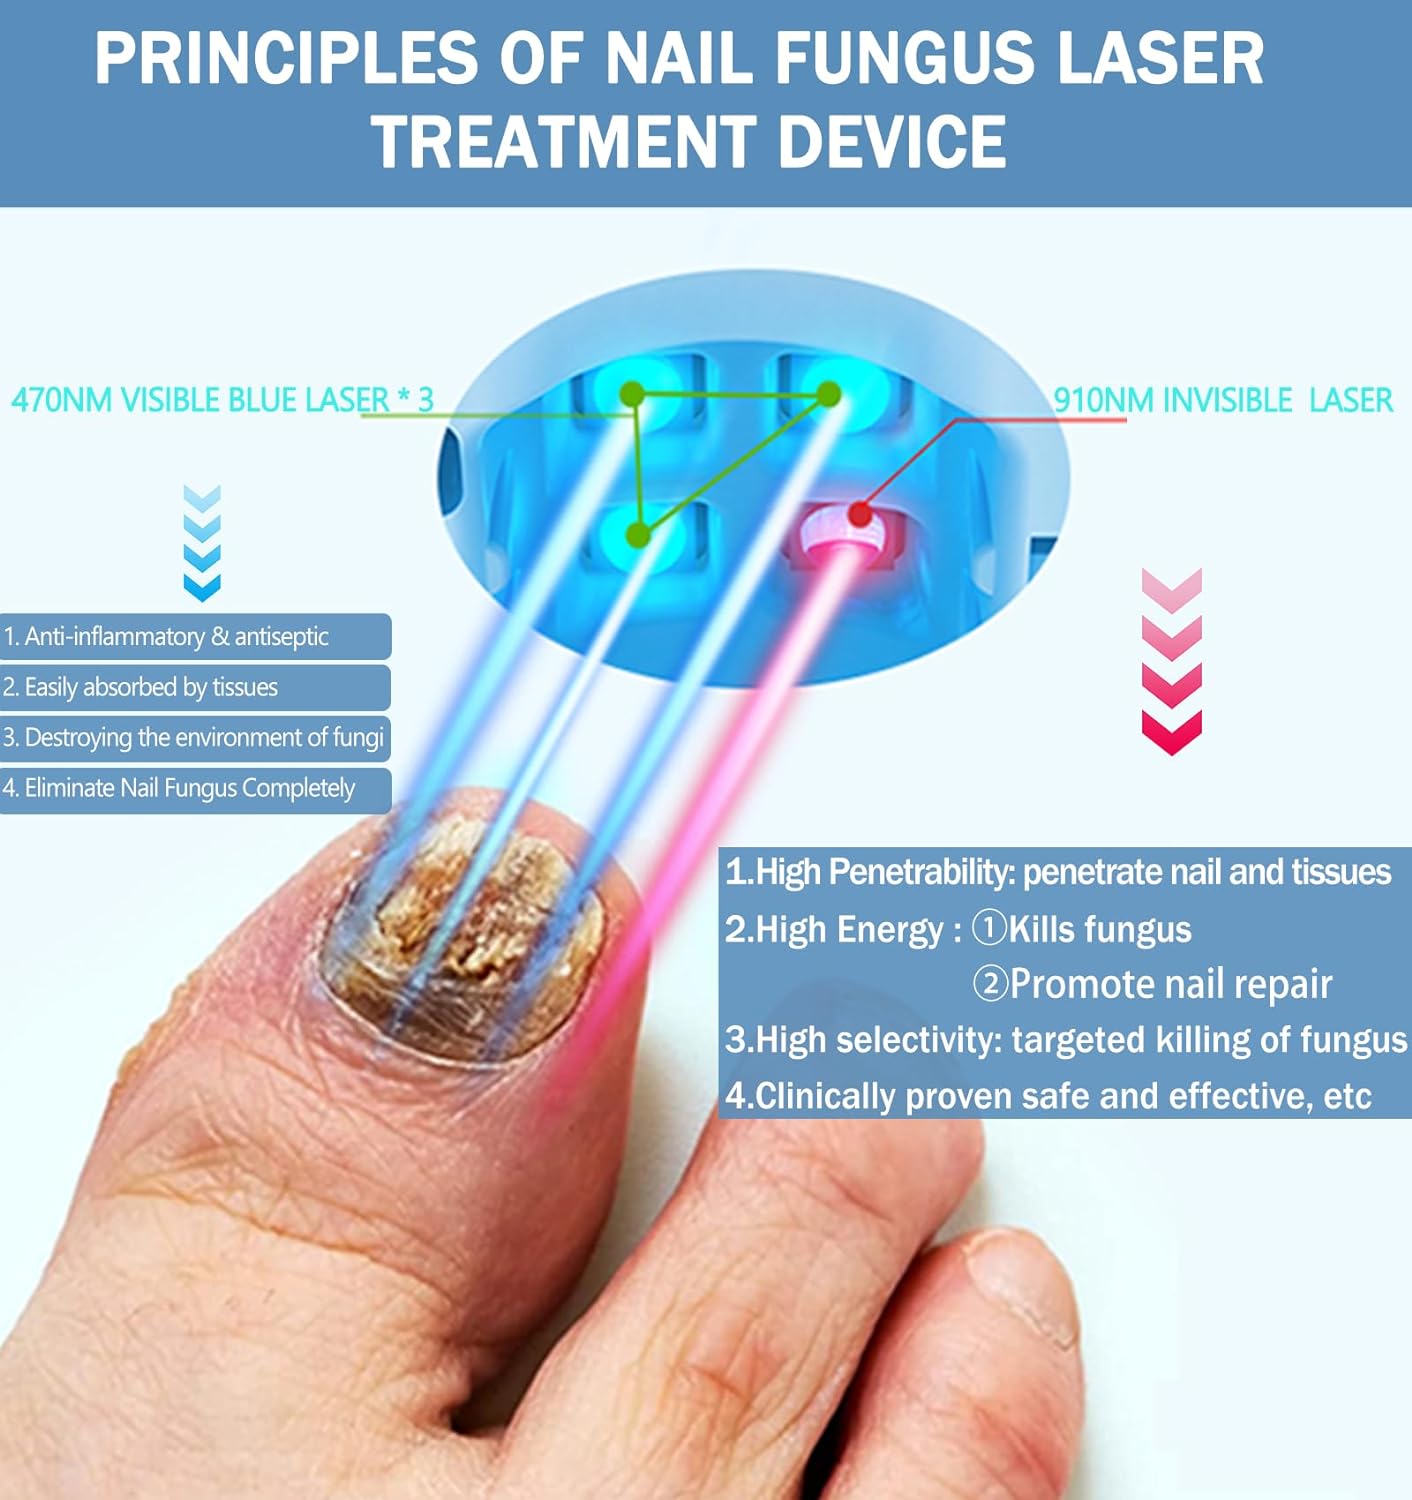 iKeener Nail Fungus Laser Treatment Device For Toenail, Fingernail Fungus Treatment Extra Strength With 407nm Blue Light& 905nm Laser To Treat Onychomycosis,Toe Nail Fungus Cleaning Removal At Home